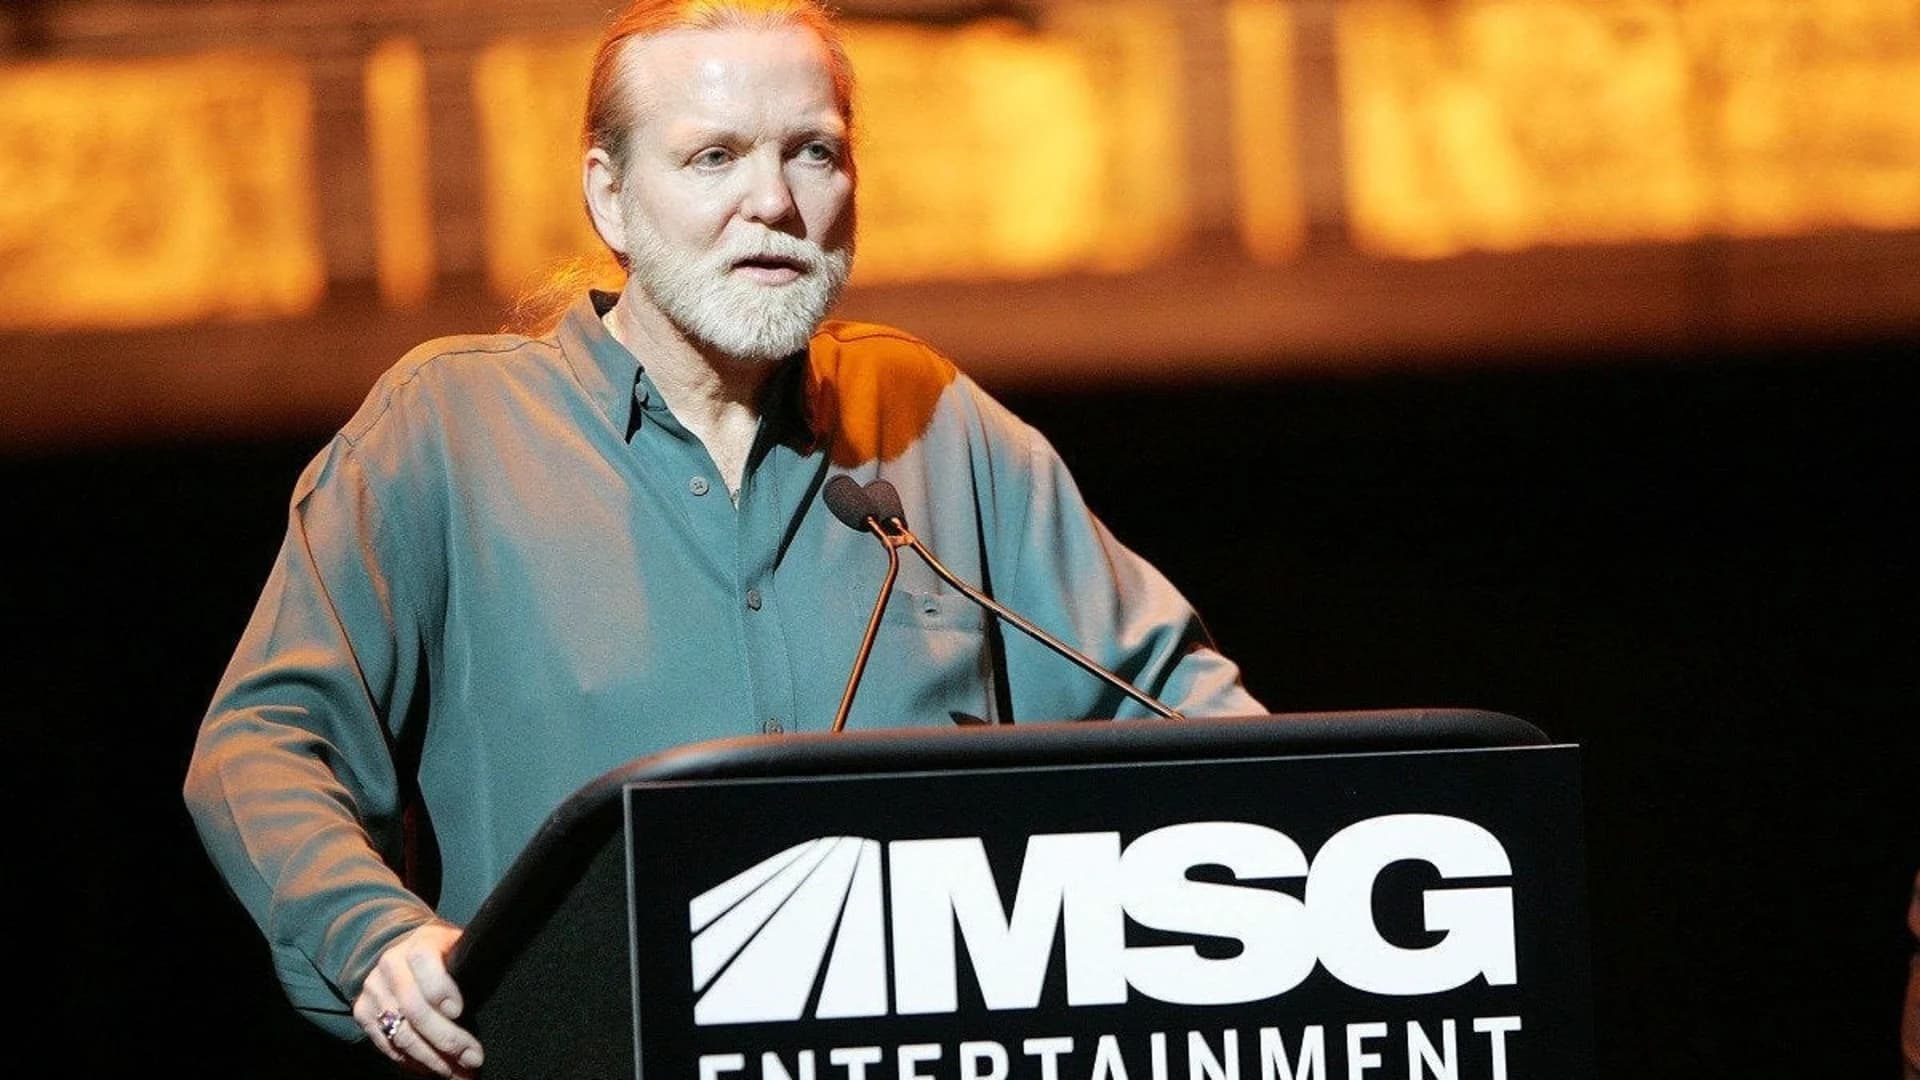 Gregg Allman of The Allman Brothers Band dies at age 69